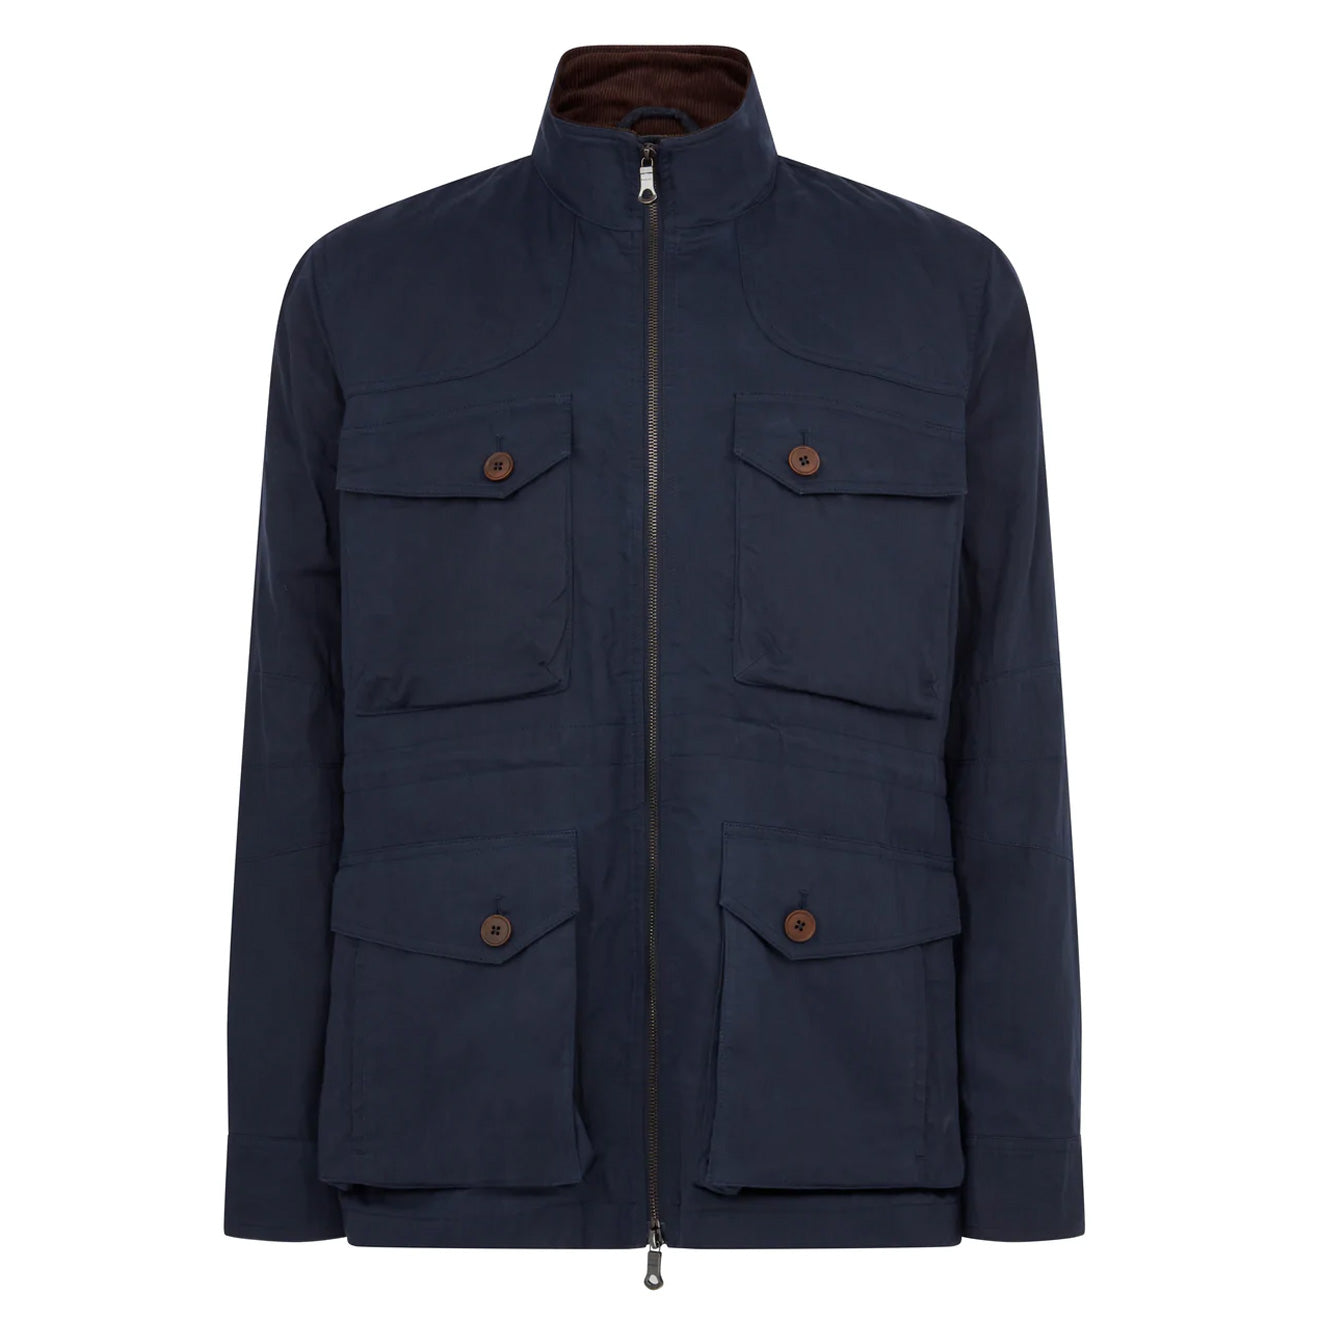 James Purdey Autumn Hanning Jacket Midnight | The Sporting Lodge